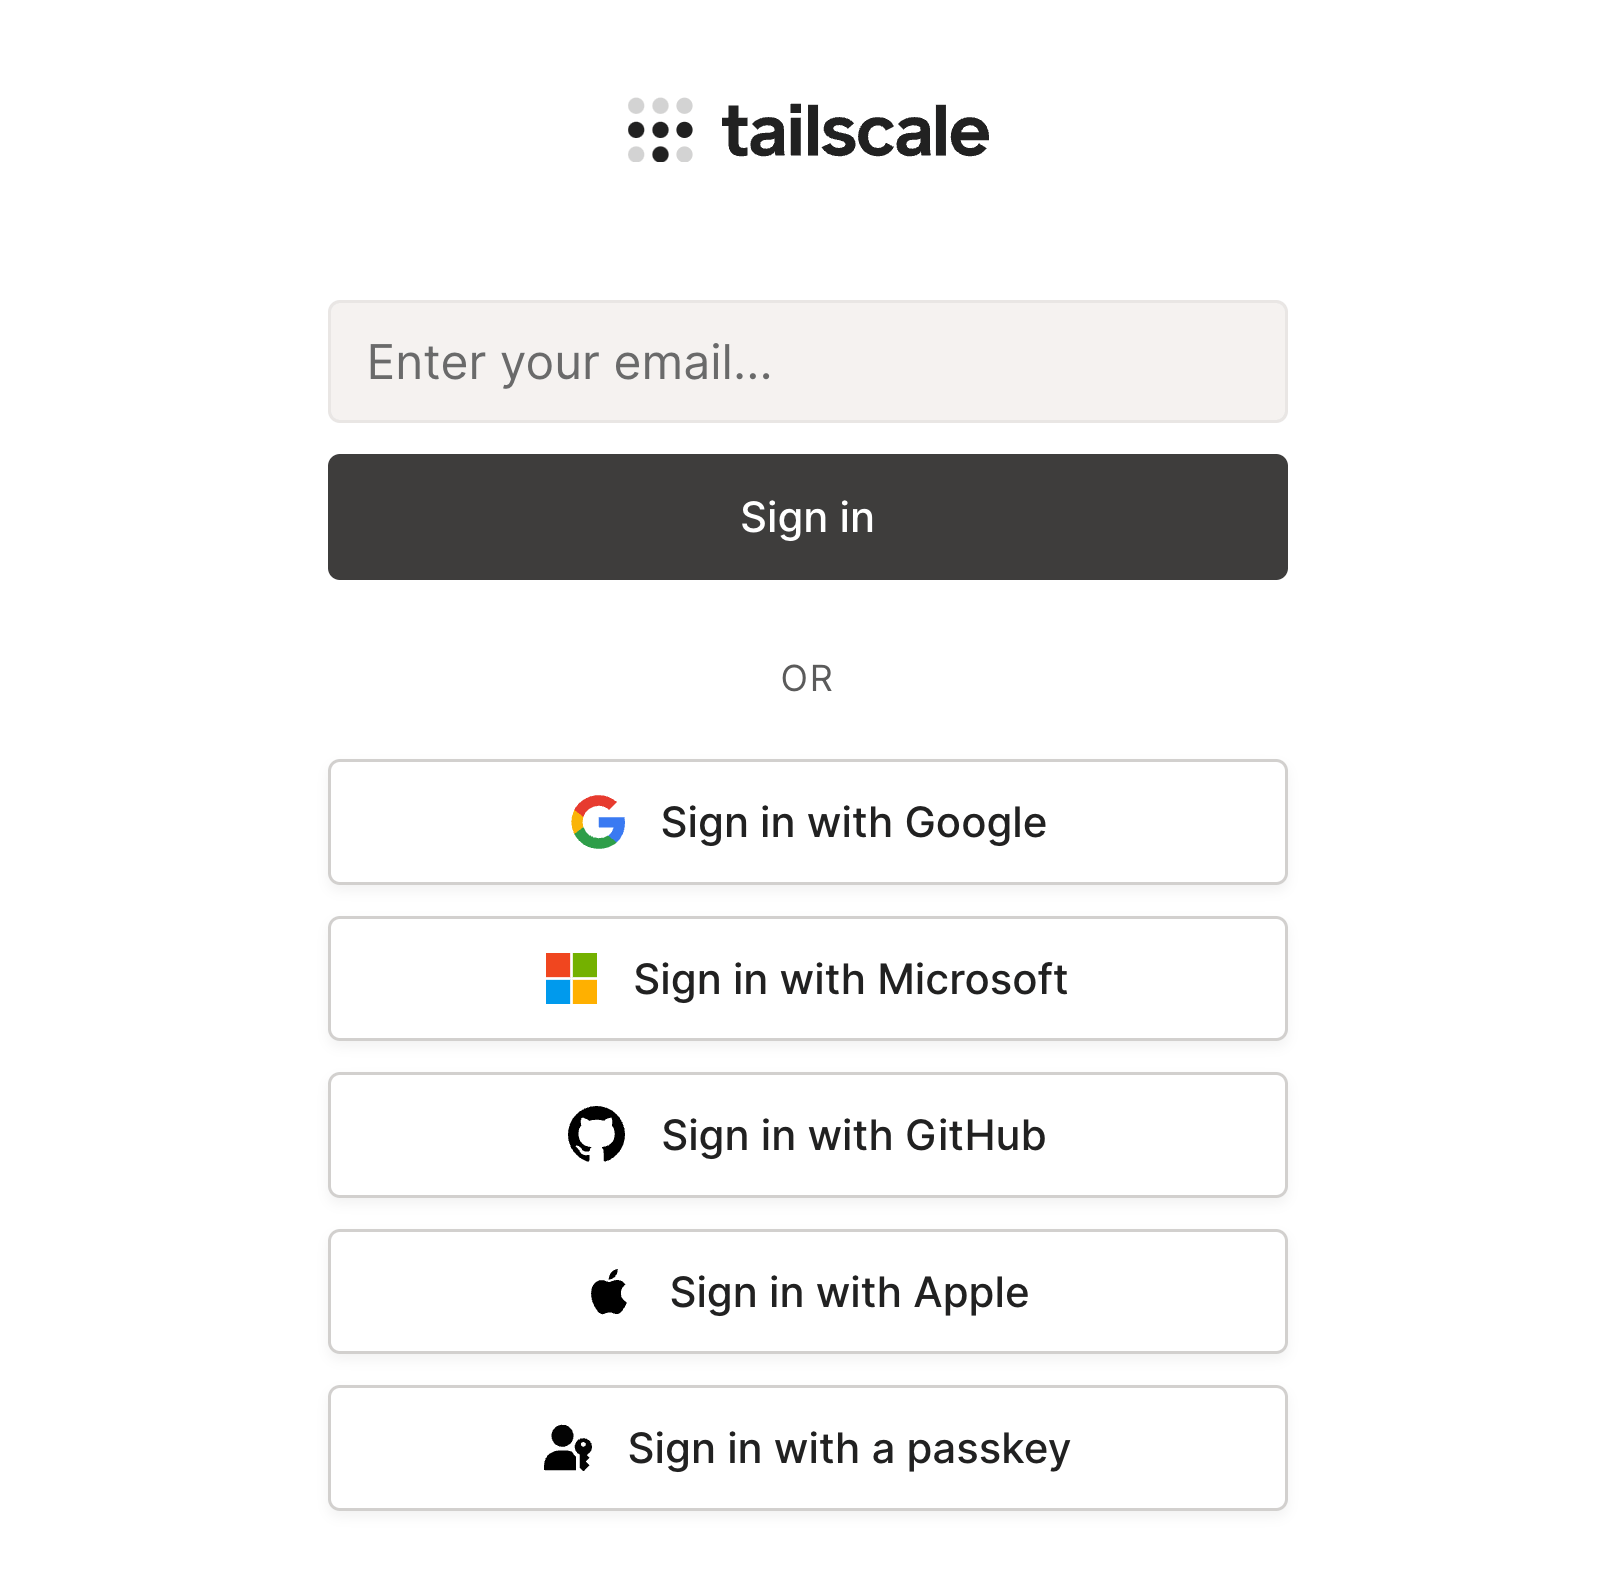 A screenshot of tailscale's log in page which has buttons for Google, Microsoft, GitHub, Apple, and passkeys